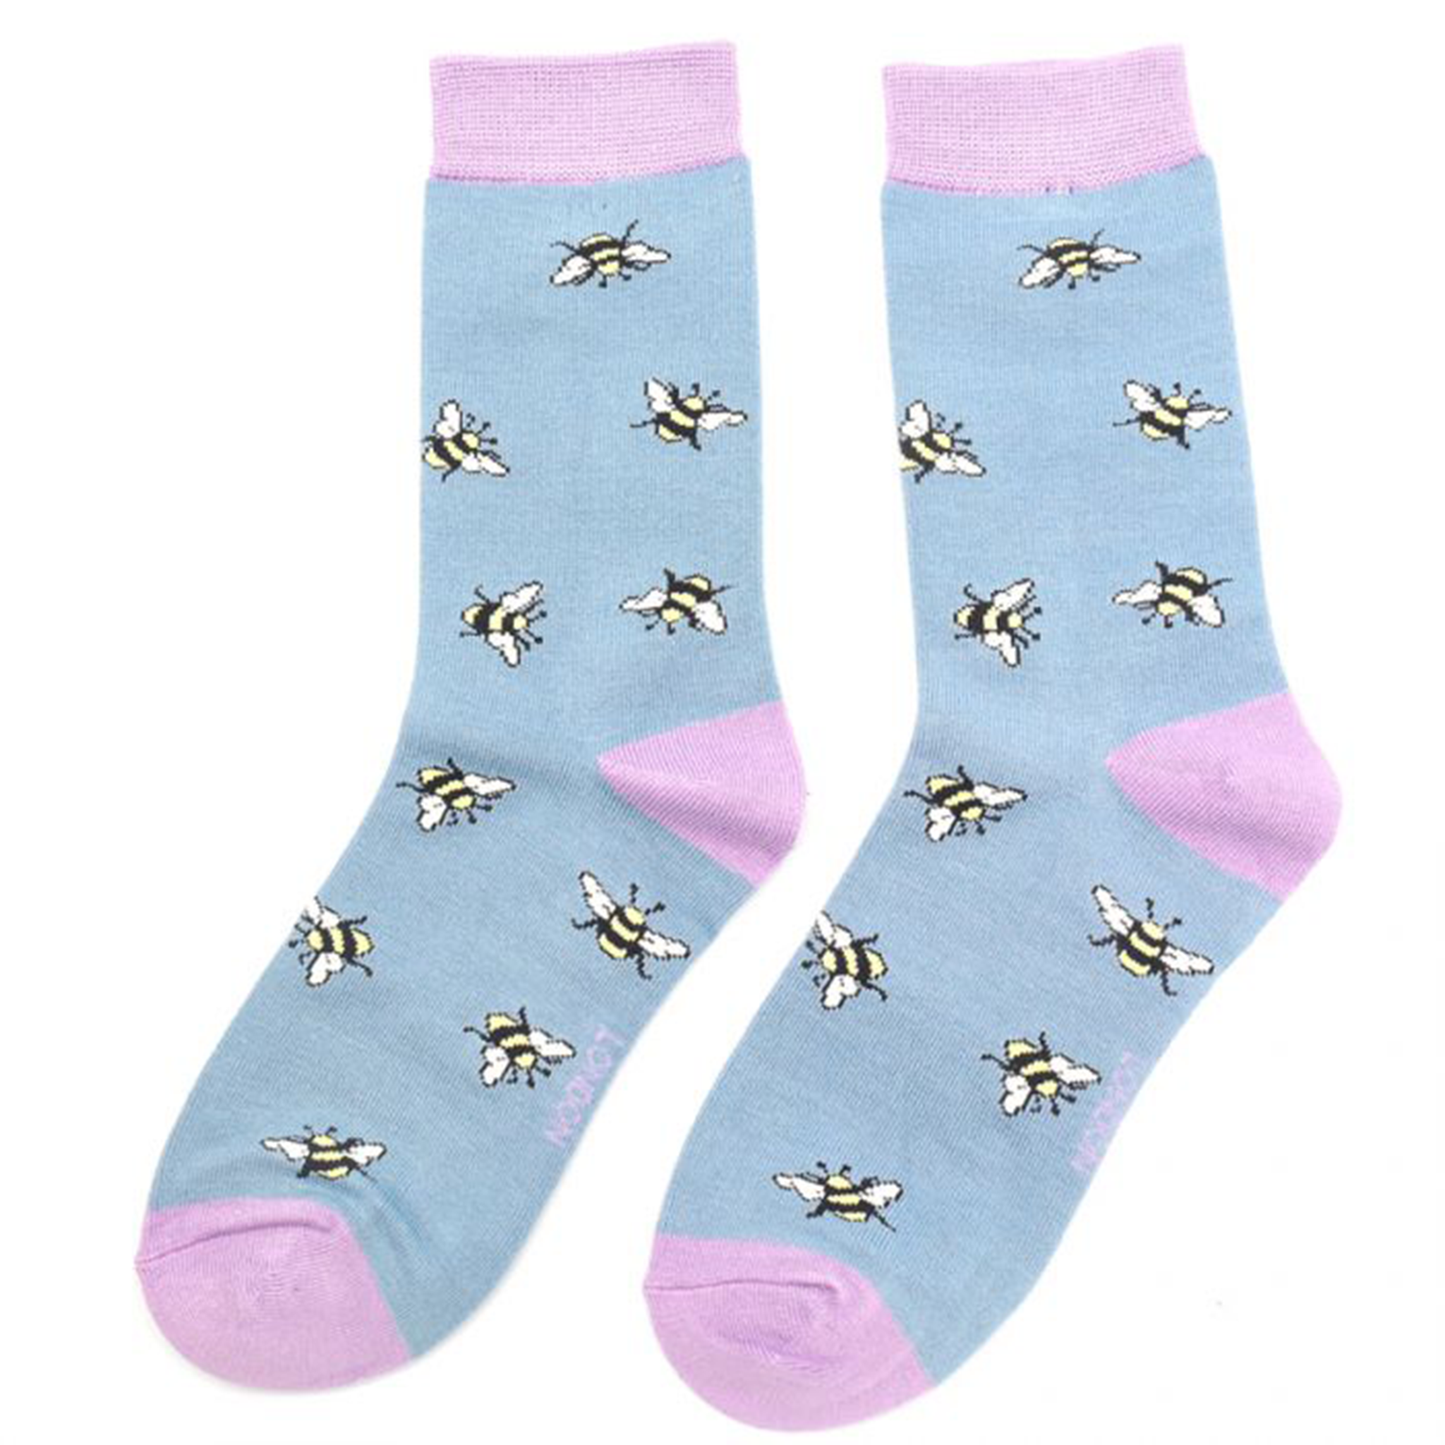 blue and lilac socks with a bumblebee pattern